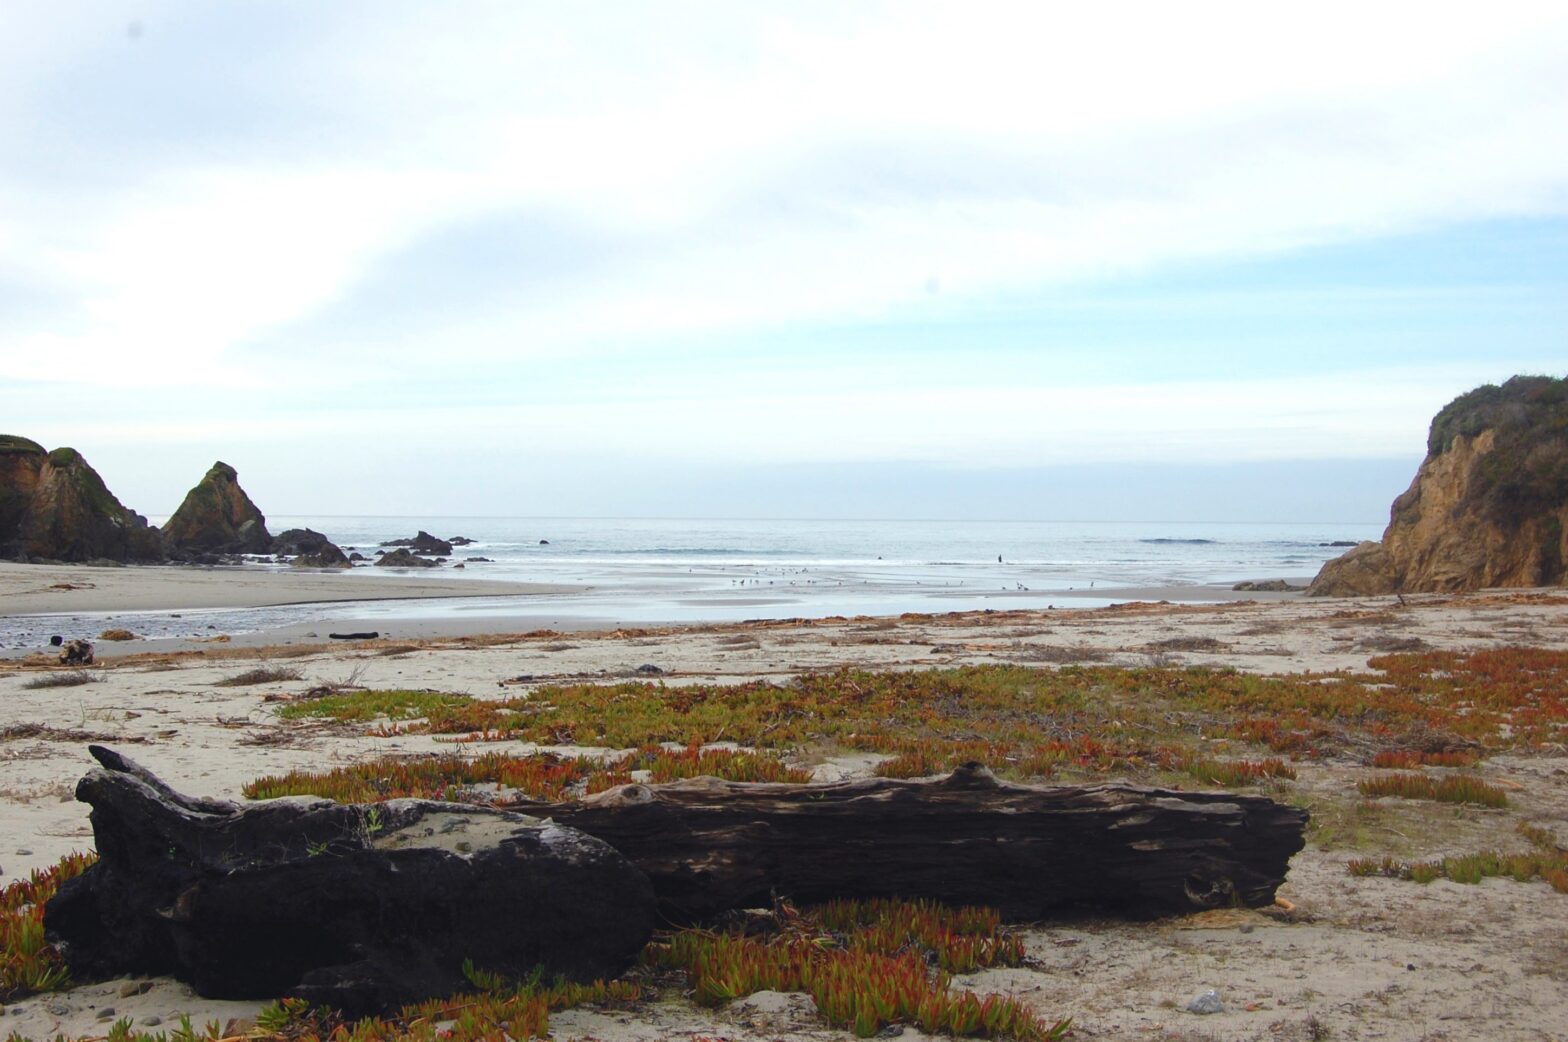 Hare Creek Beach - Public access beach owned and conserved by the Mendocino Land Trust